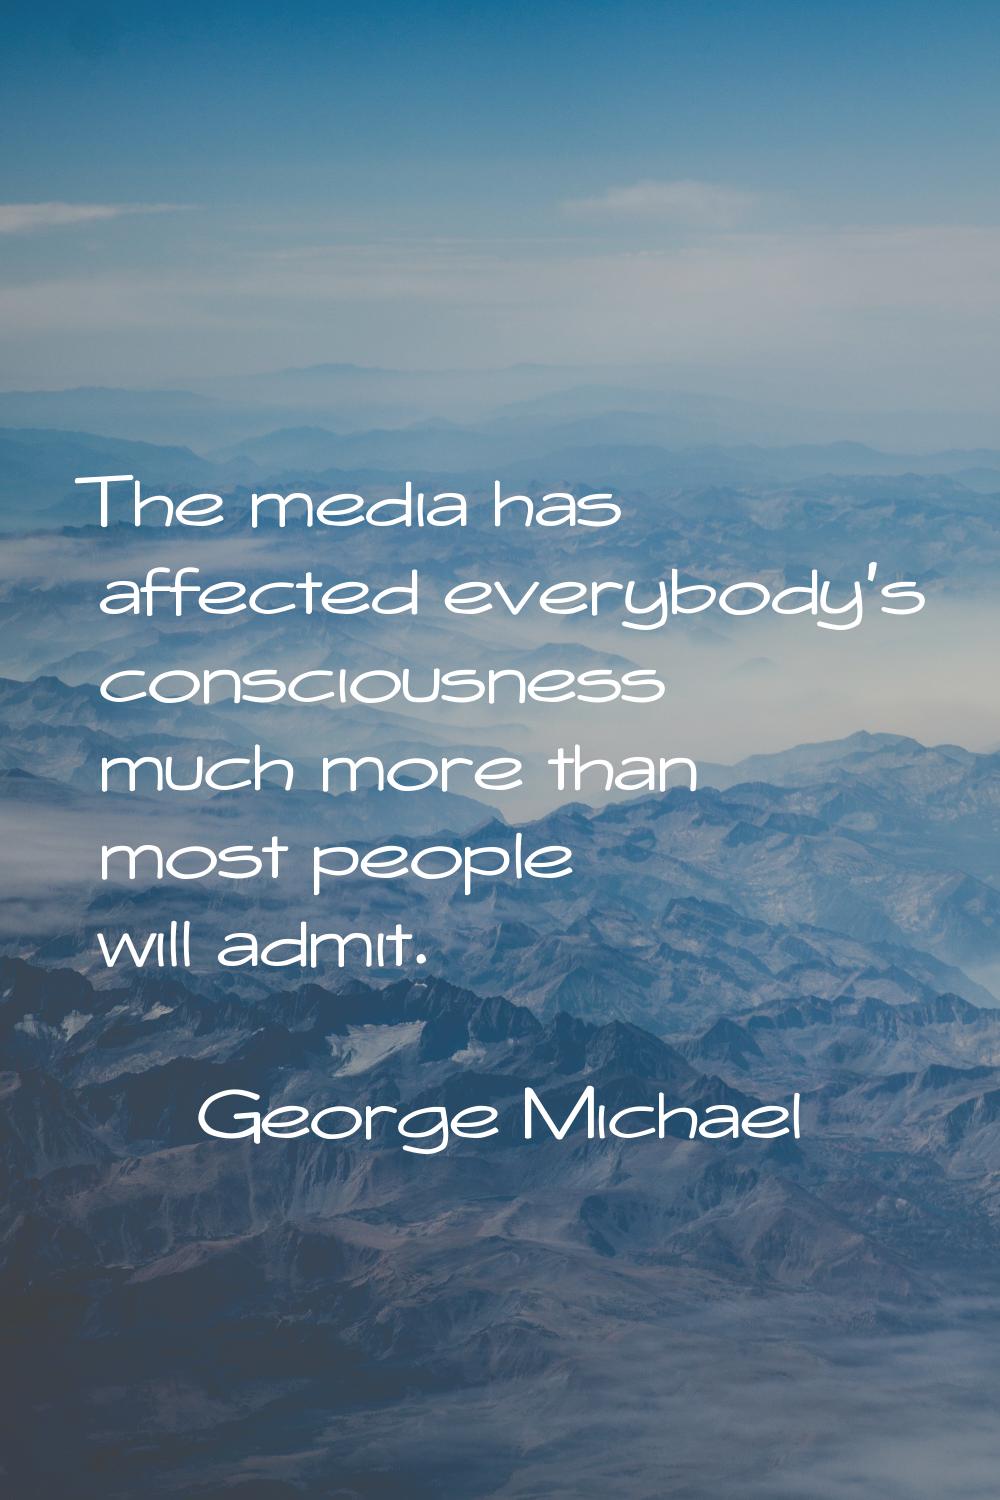 The media has affected everybody's consciousness much more than most people will admit.